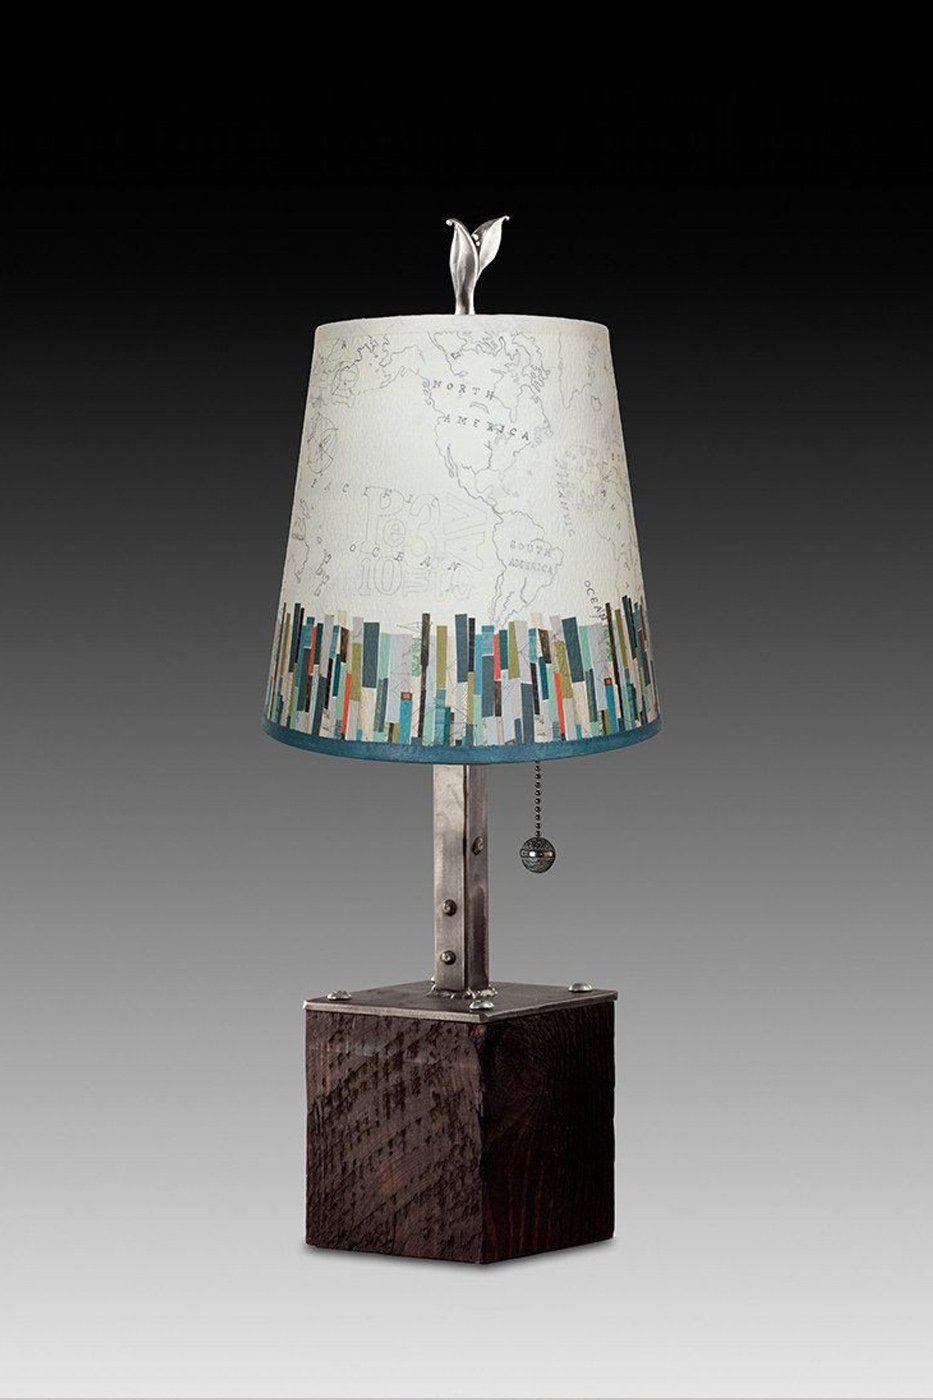 Steel Table Lamp on Reclaimed Wood with Small Drum Shade in Papers Edge